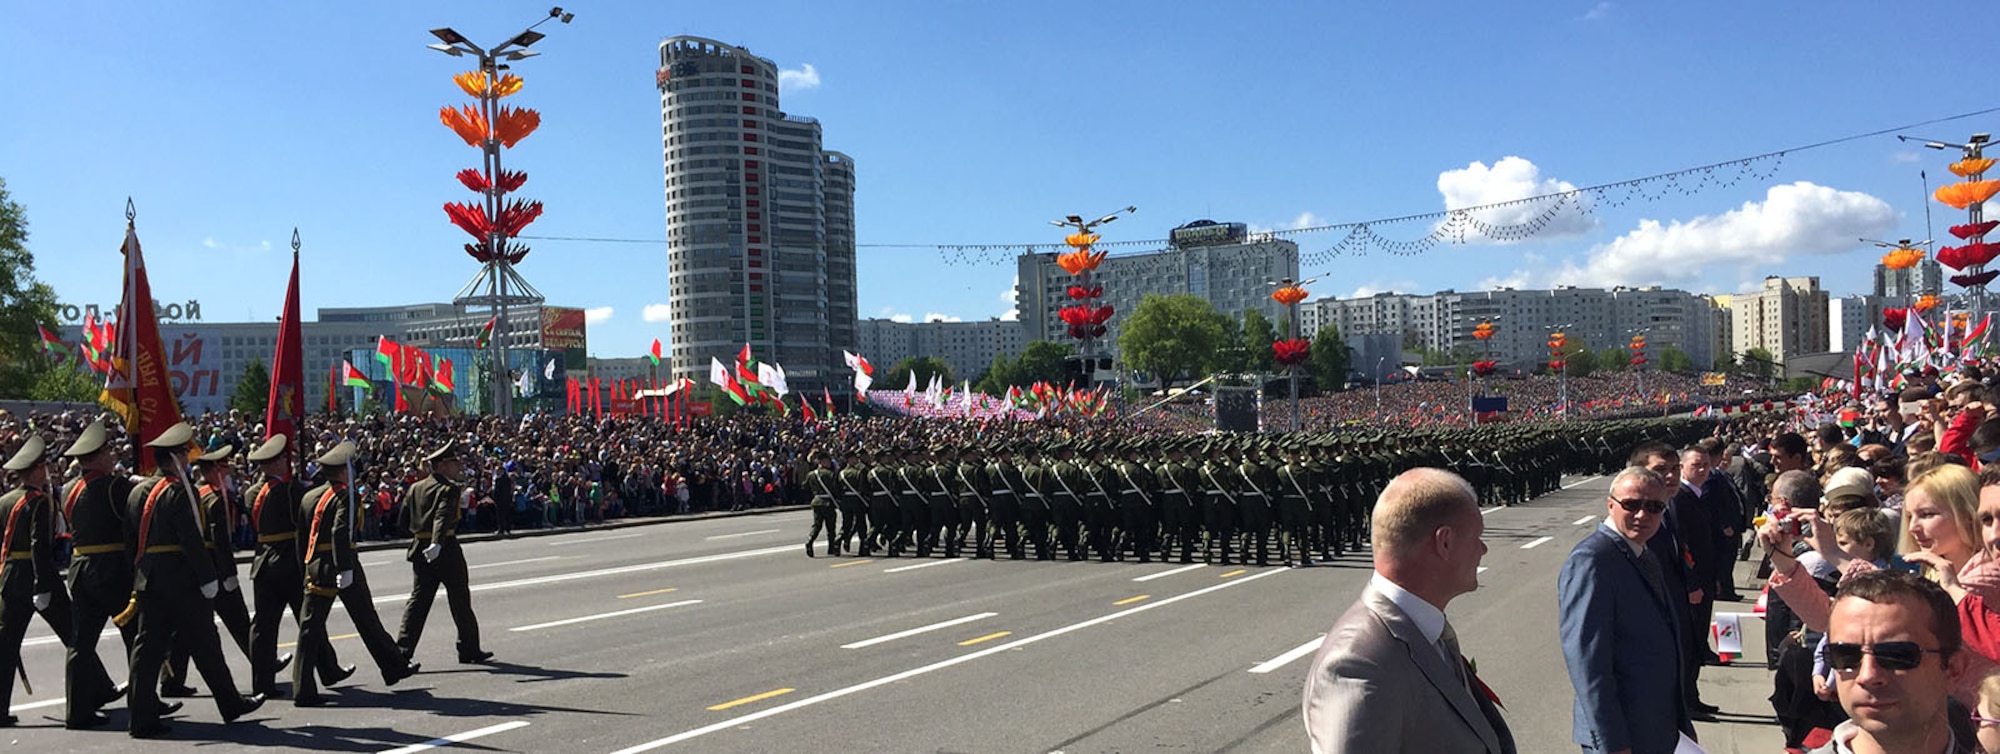 MINSK, BELARUS -- Armed Forces of Belarus soldiers march in the World War II 
Victory Day Parade May 9, 2015, in Minsk, Belarus. More than 5,000 Belarussian 
soldiers and 250 military vehicles participated in the parade. For the first 
time in Belarus' history, participants from the U.S. Department of Defense 
marched in the parade to commemorate the sacrifices of the World War II Allies 
and the end of hostilities 70 years ago. Thirty-four bandsmen from the U.S. 
Air Forces in Europe Band marched in the Victory Day Parade and performed 
concerts in Brest and Minsk, Belarus. (U.S. Air Force photo by Master Sgt. 
Brian Bahret)
